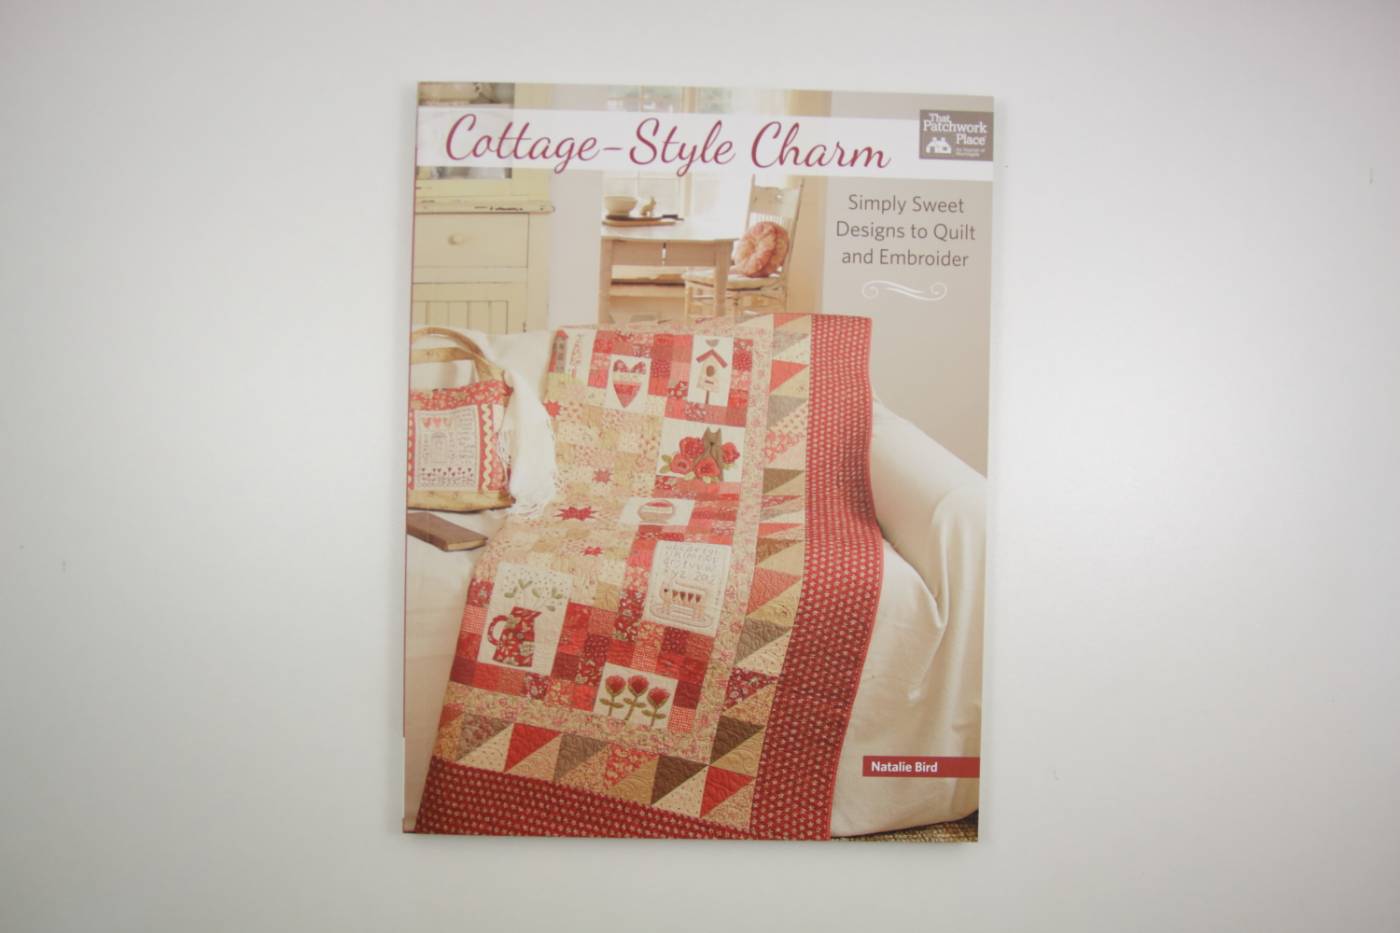 Cottage-Style Charm-patchwork, applicati